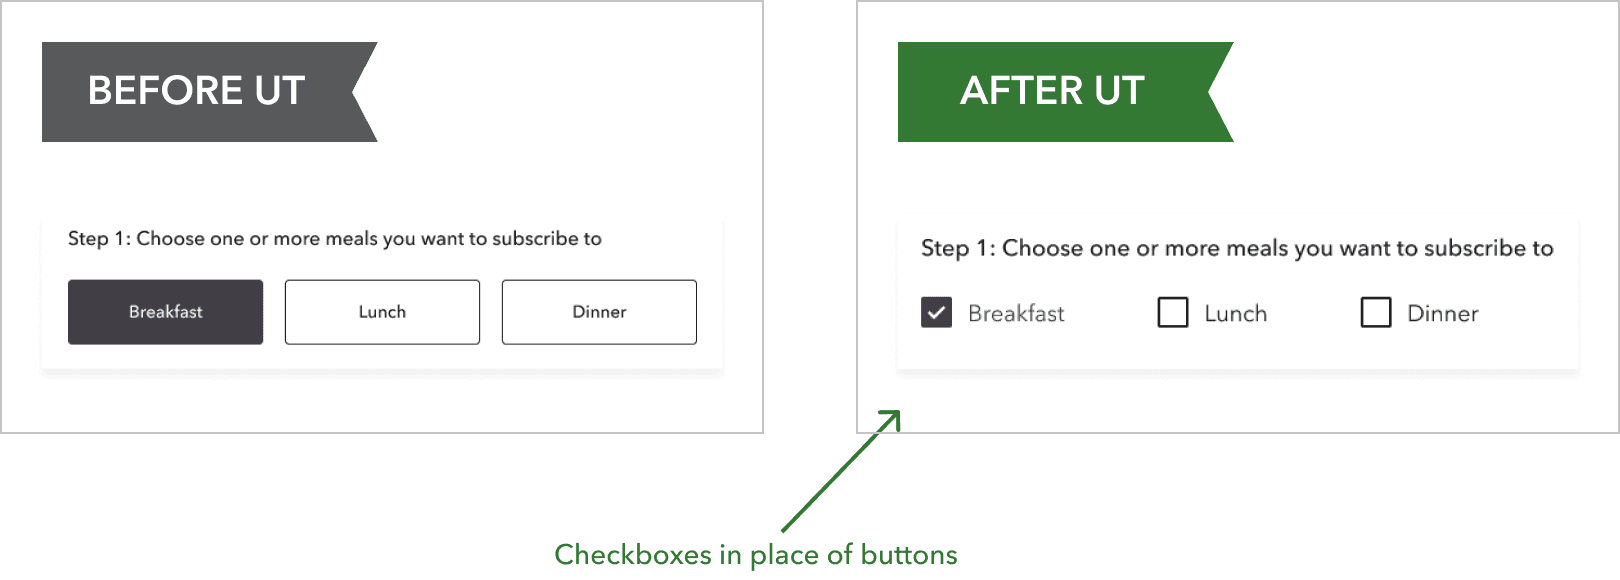 Priority revision for choose meal multiselect